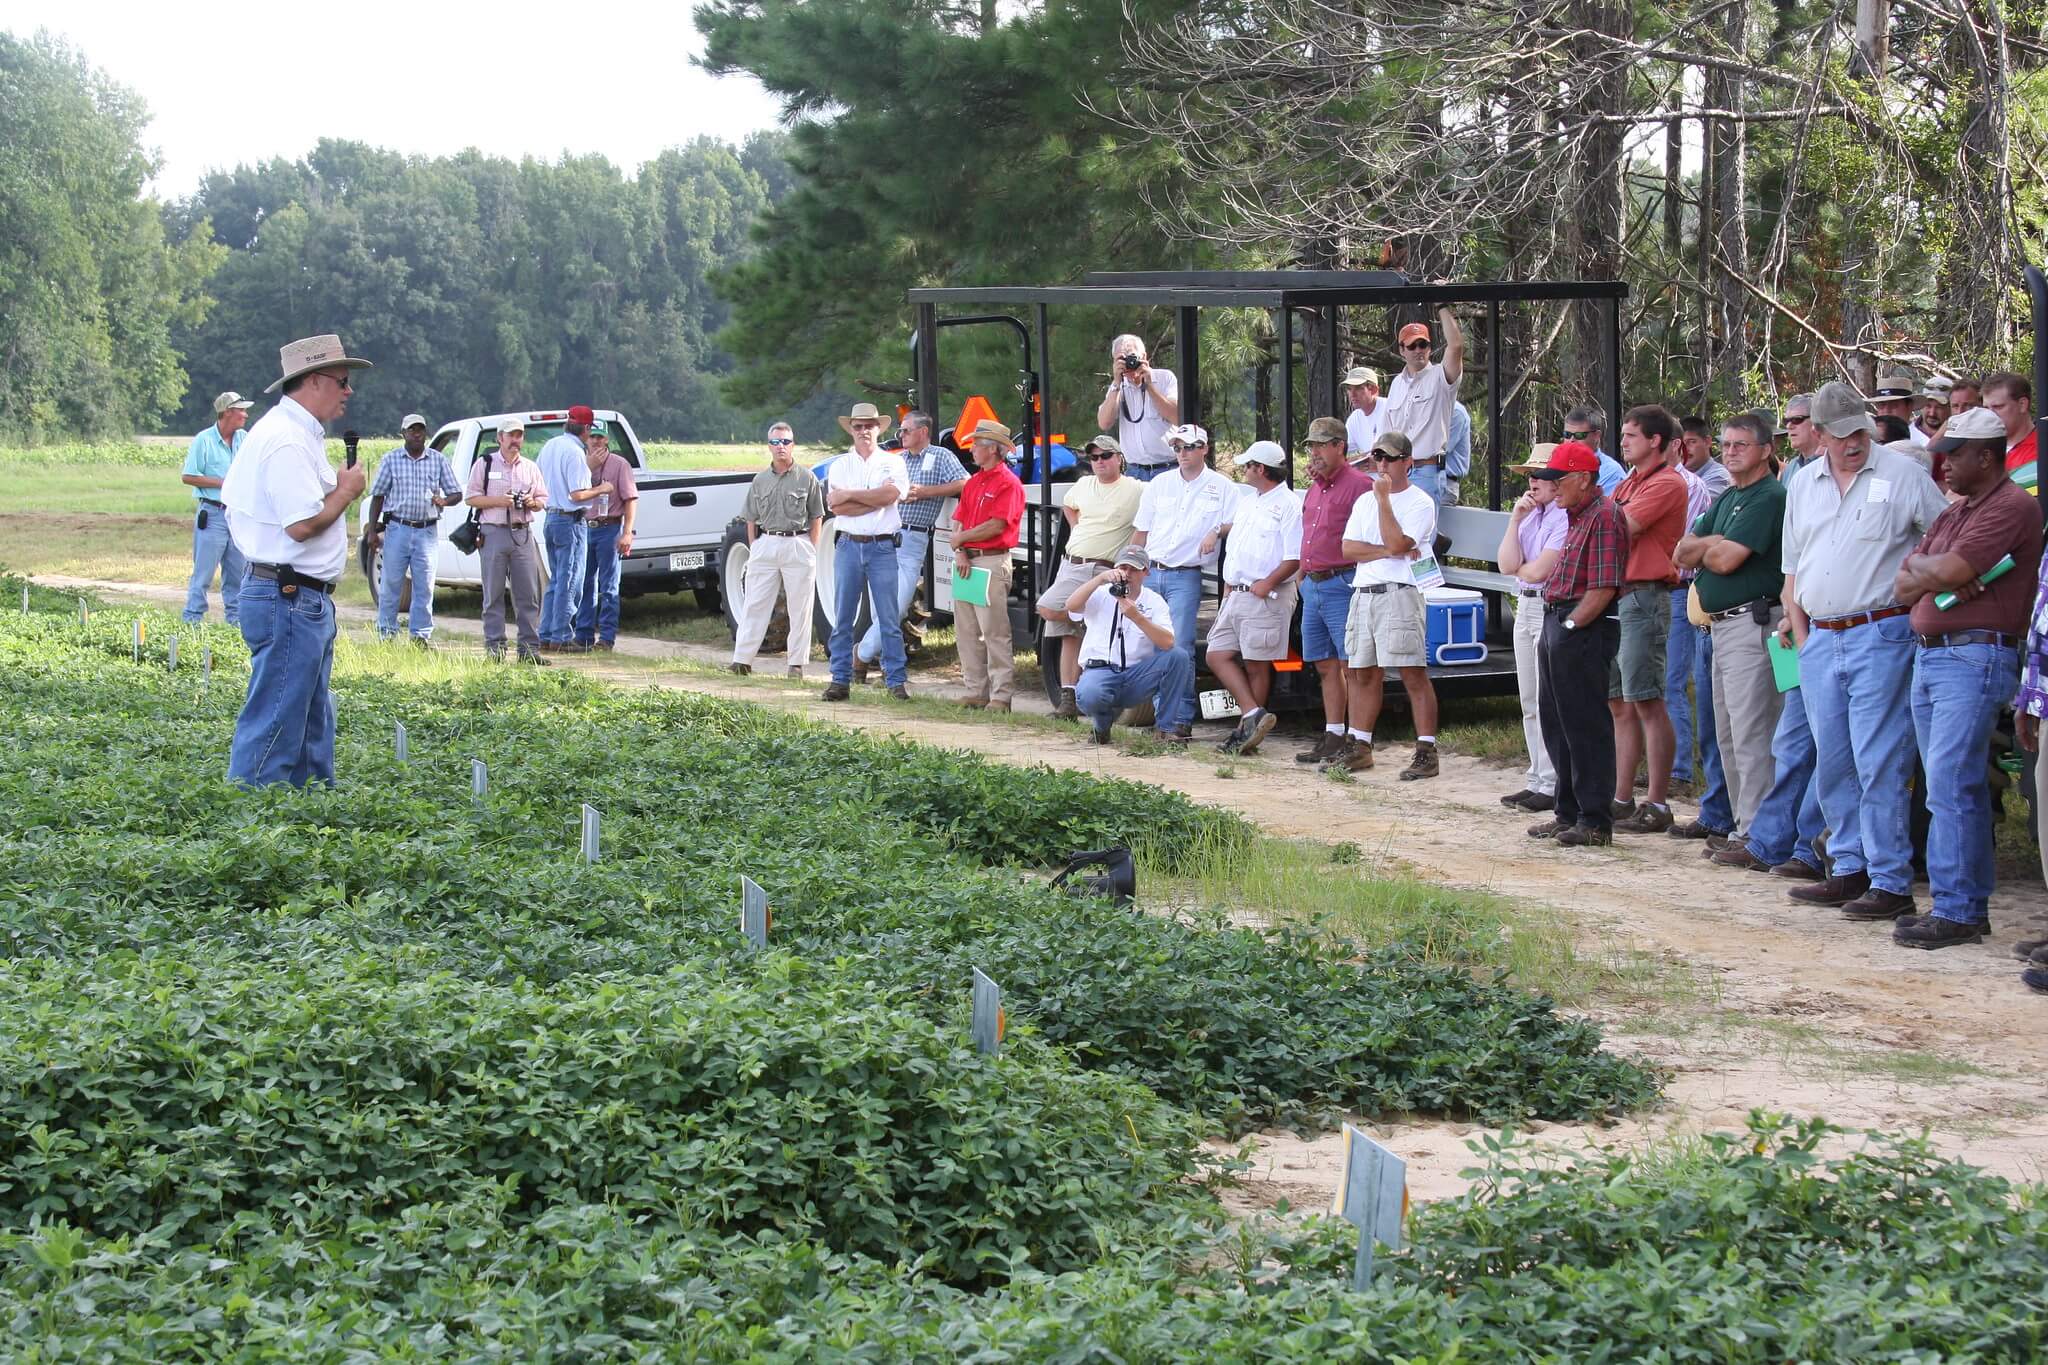 A faculty member discusses field research in front of a crowd, mostly dressed in sun hats and jeans on the research farm.